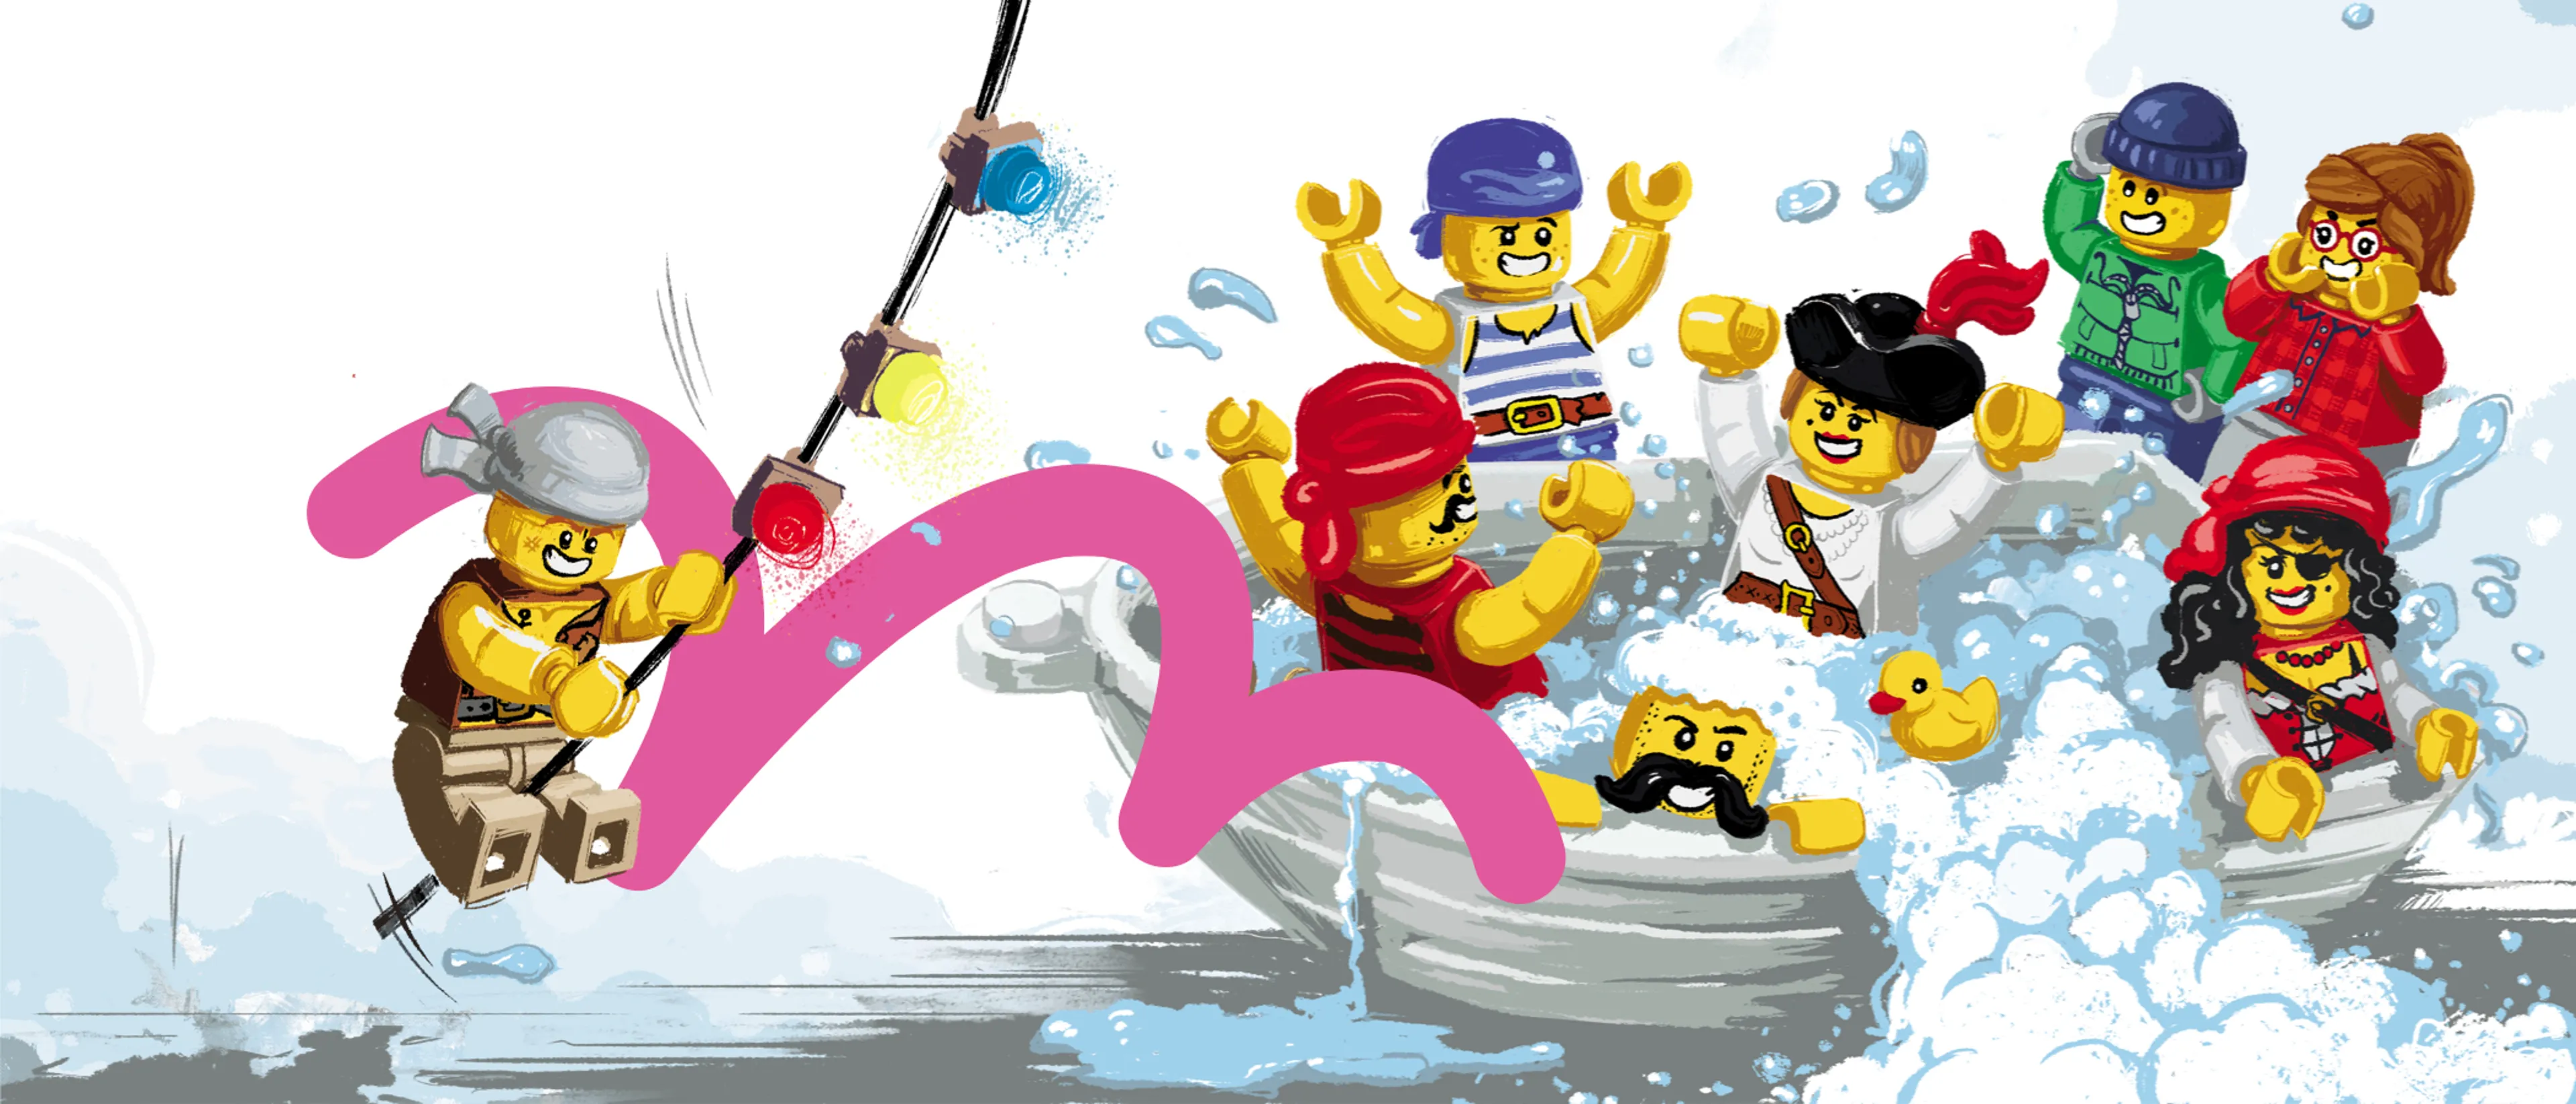 Minifig pirates playing in water